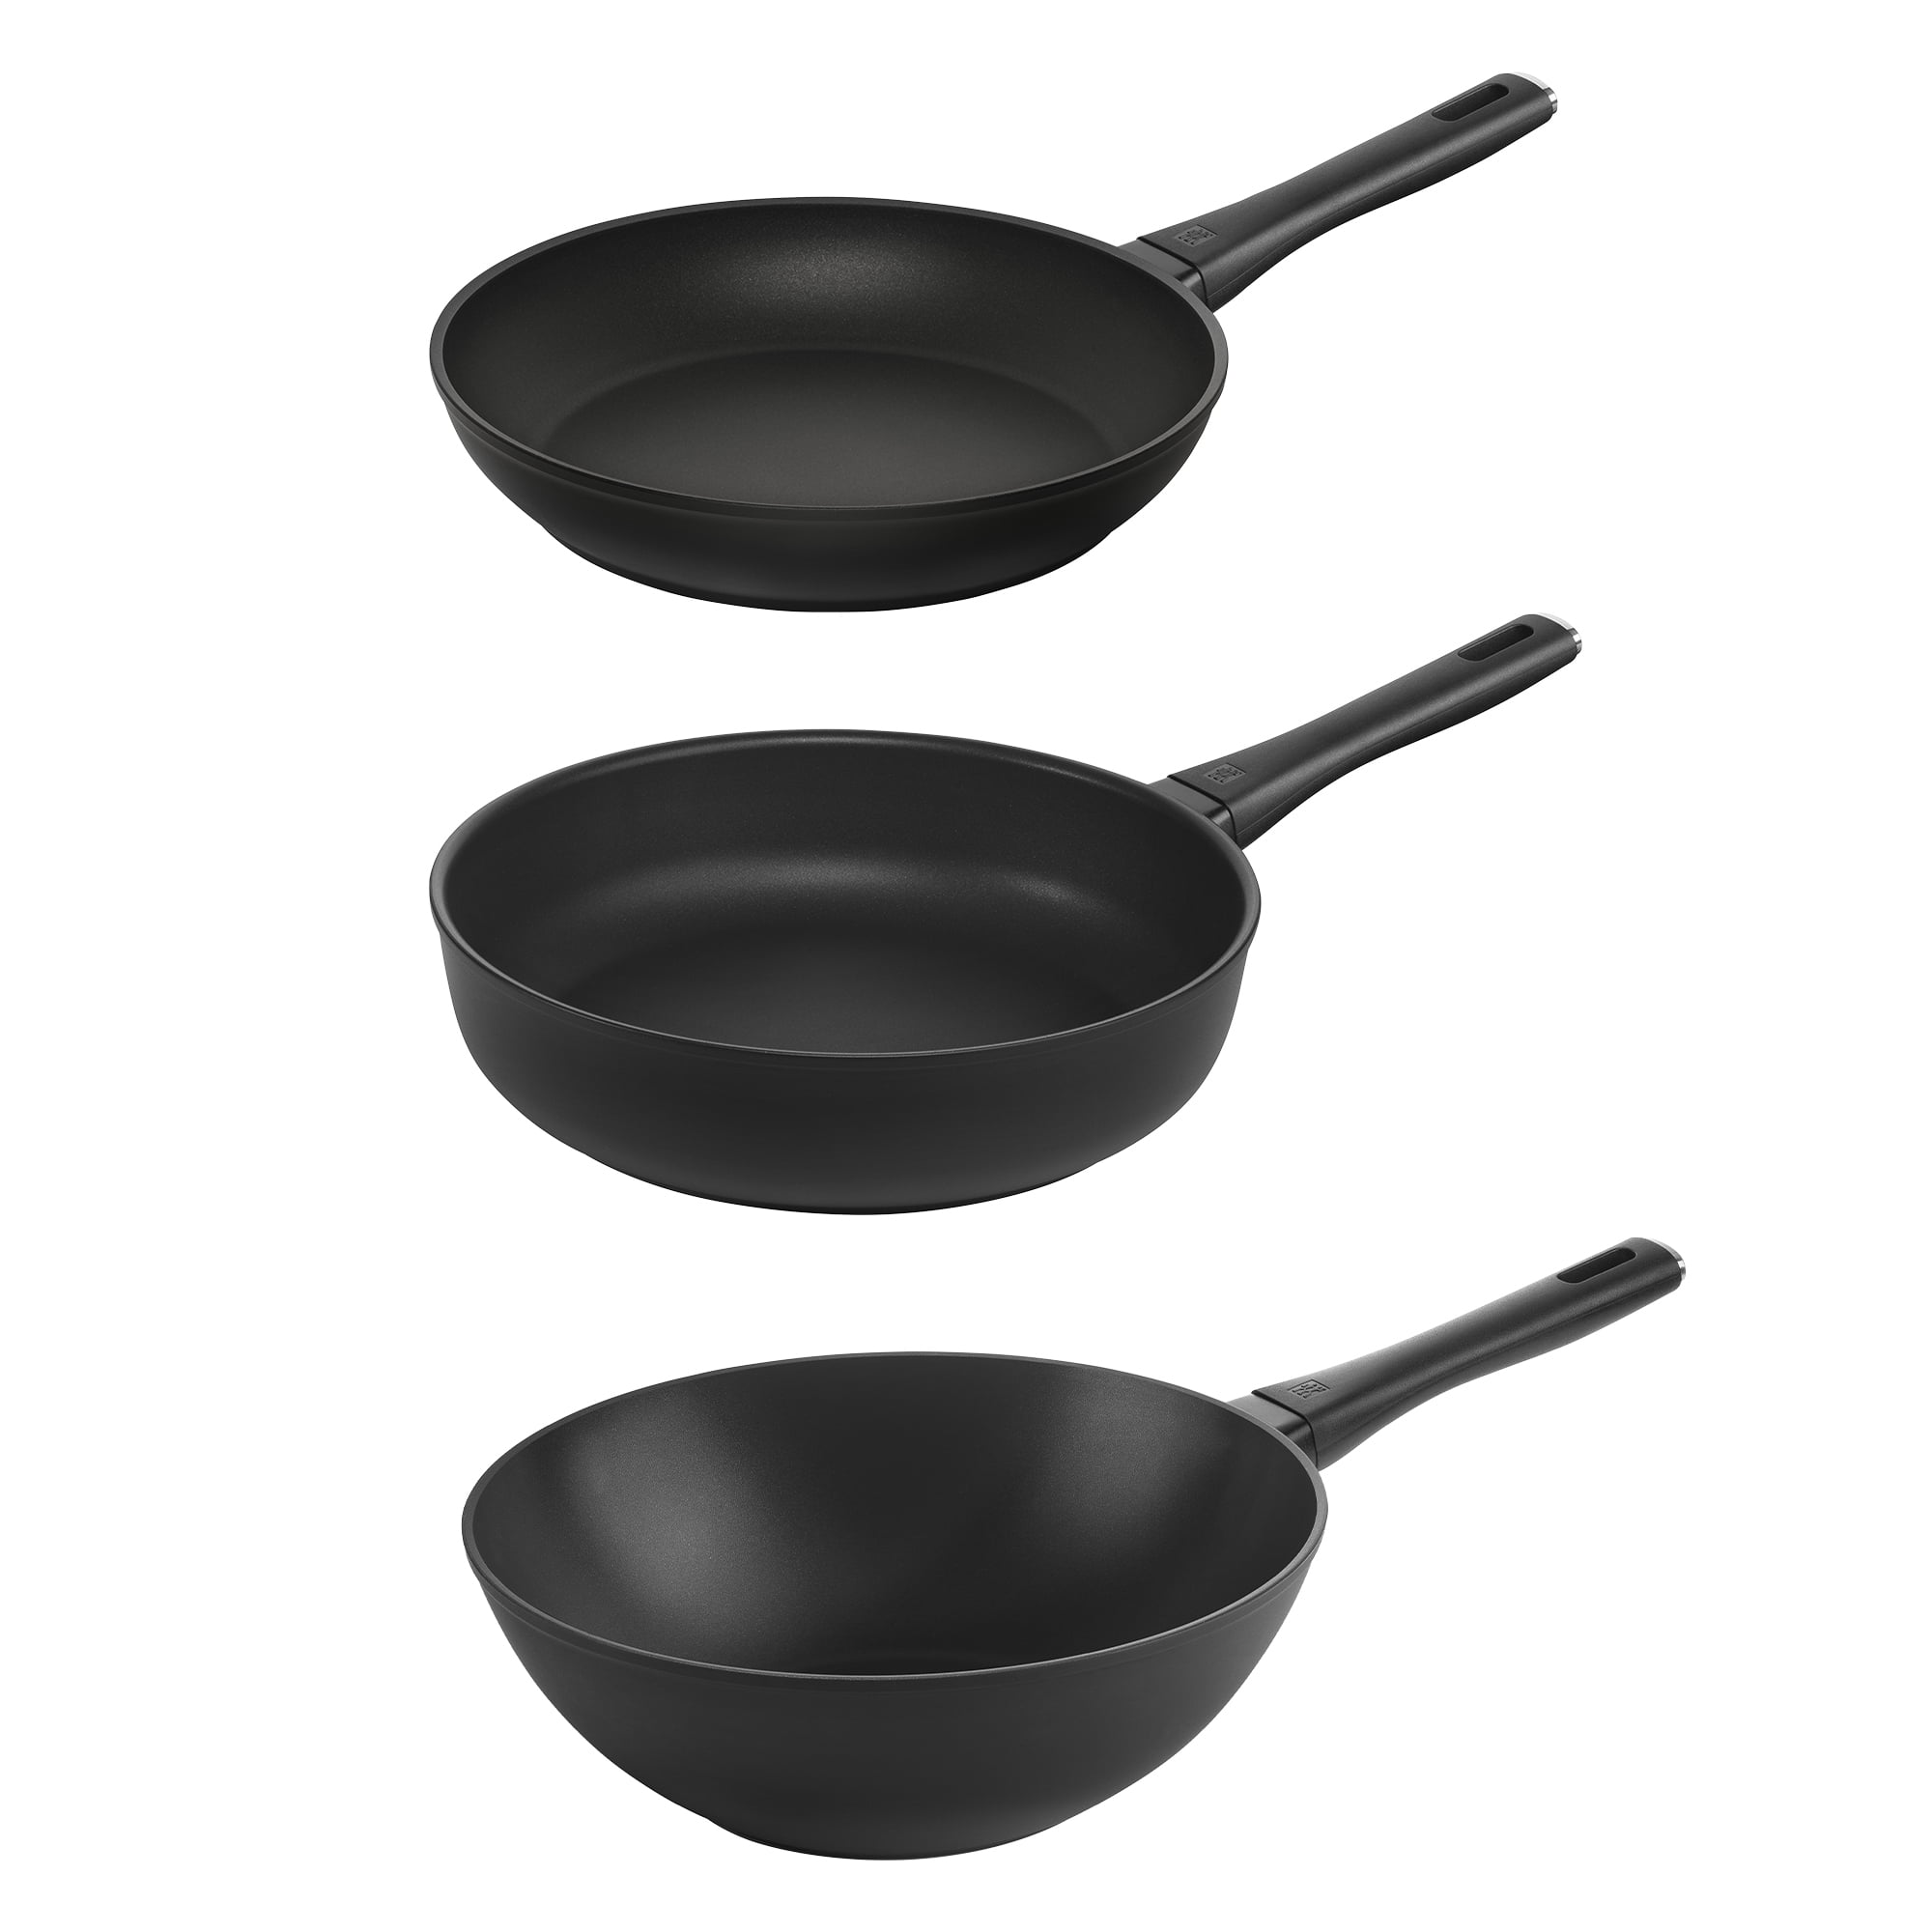 ZWILLING Madura Plus Forged Nonstick 2-pc Deep Fry Pan Set